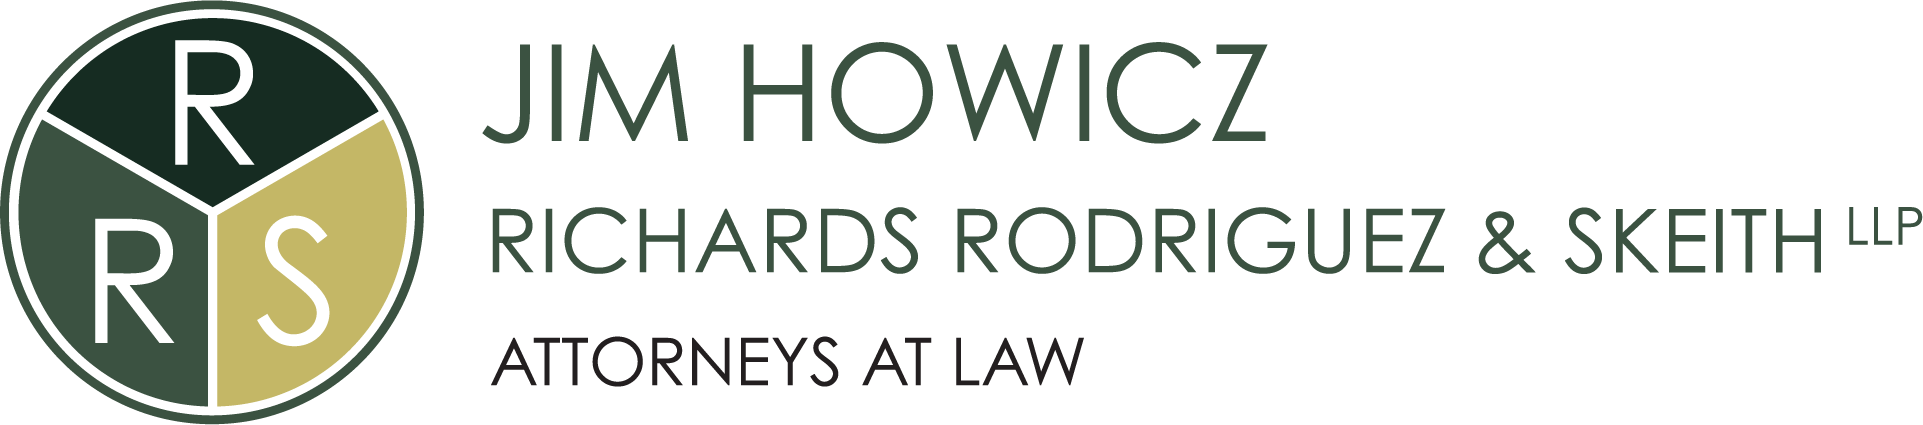 Richards Rodriguez and Skeith LLP